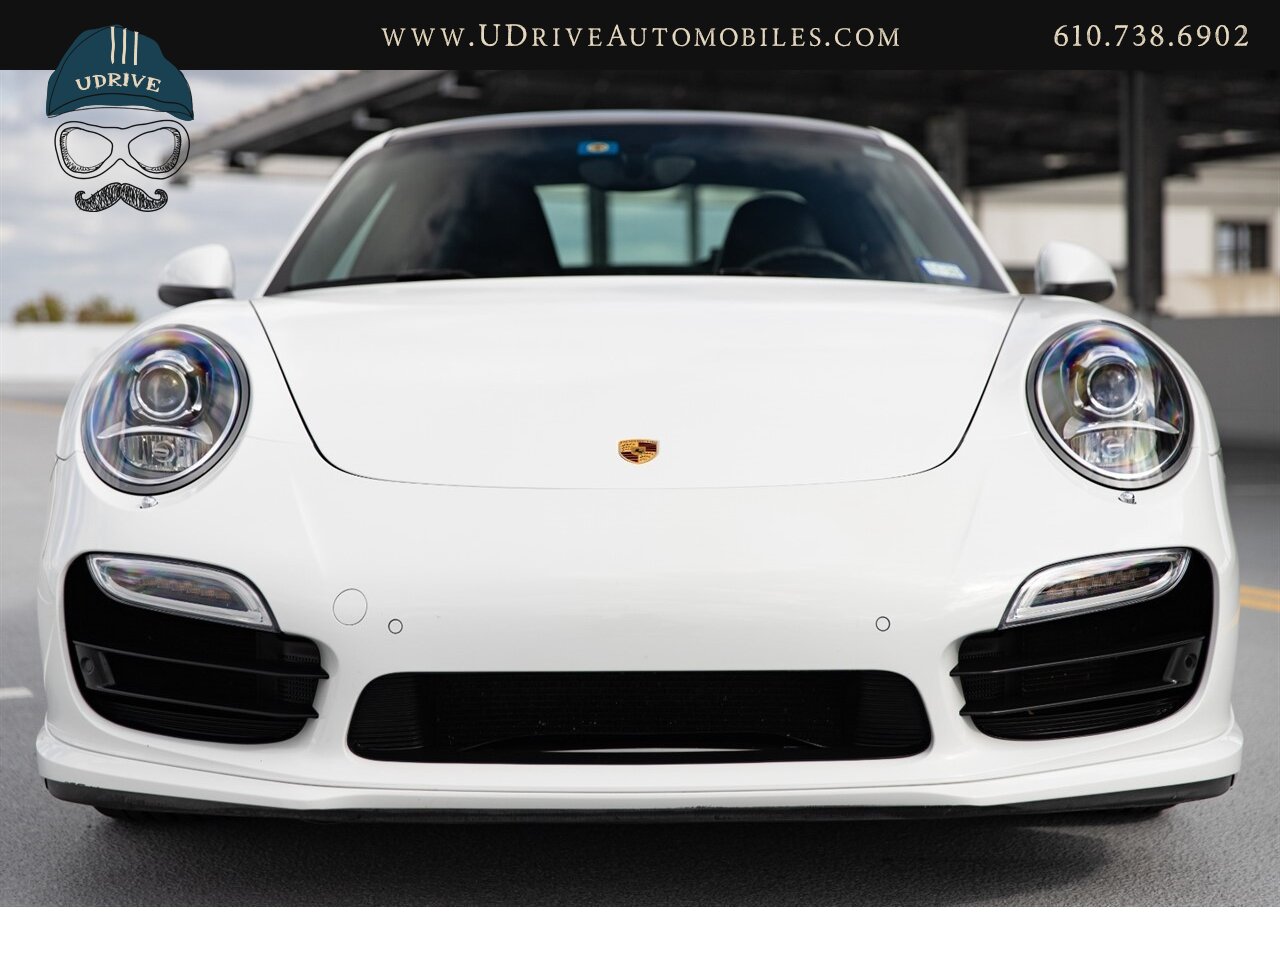 2014 Porsche 911 Turbo 12k Miles White over Black Chrono Rear Wiper  Sport Seats 20in Turbo Whls Sunroof Red Belts - Photo 11 - West Chester, PA 19382